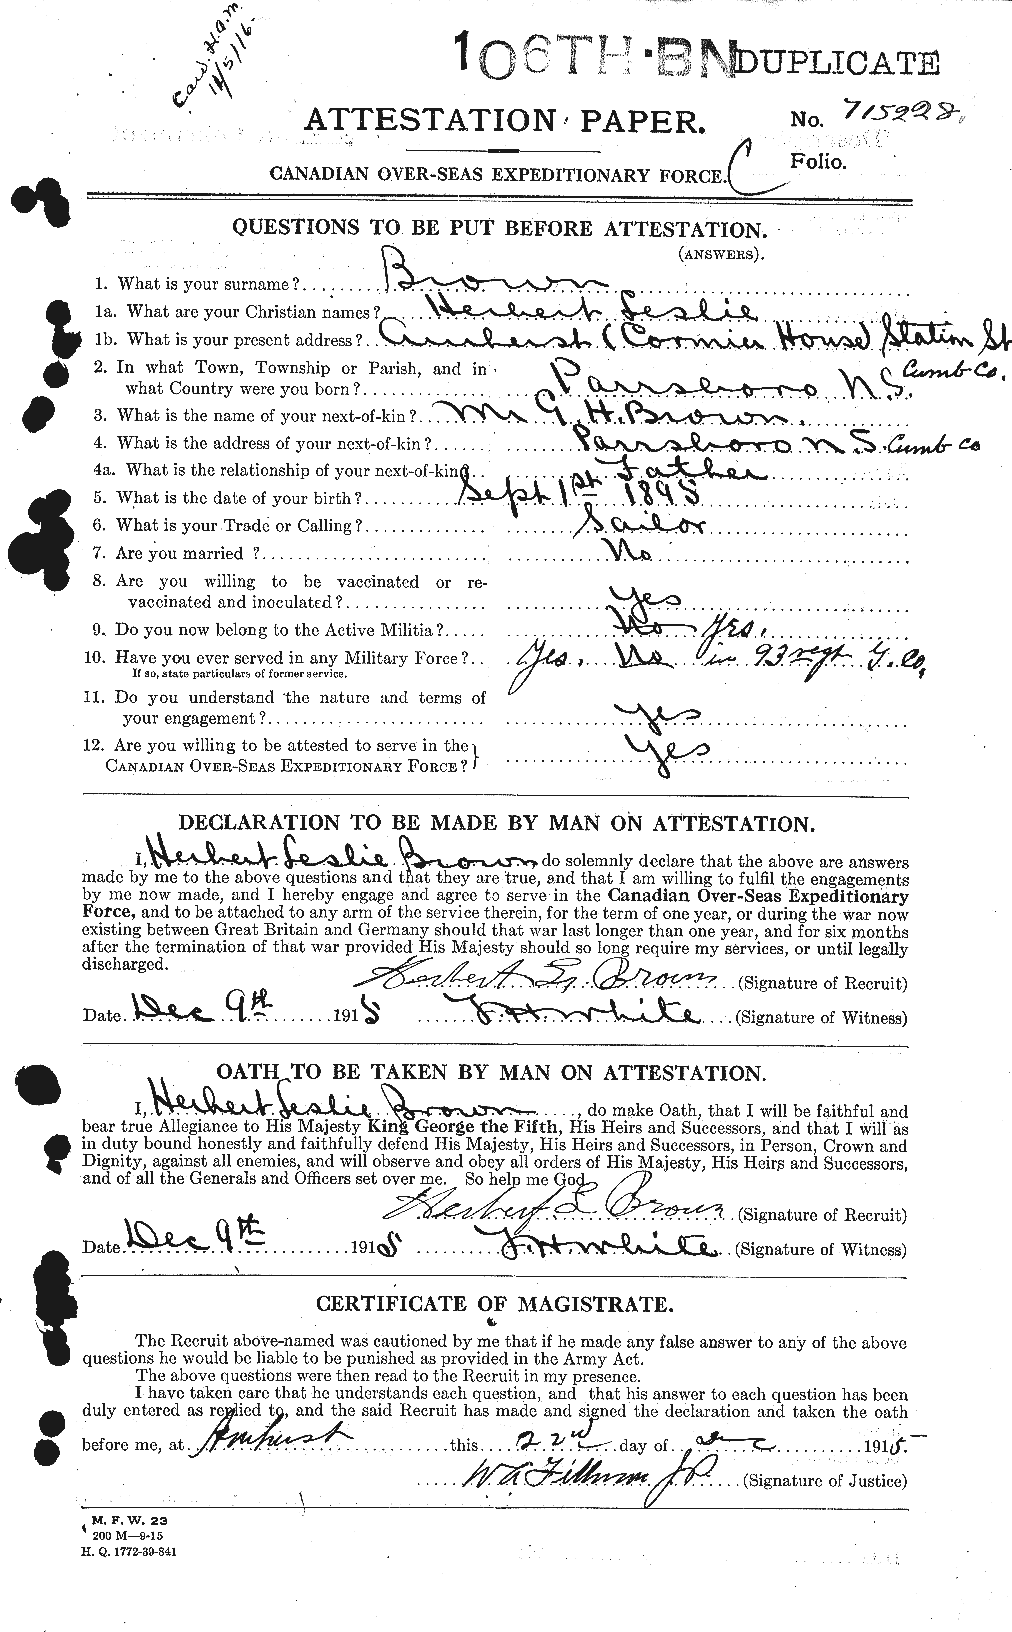 Personnel Records of the First World War - CEF 265579a